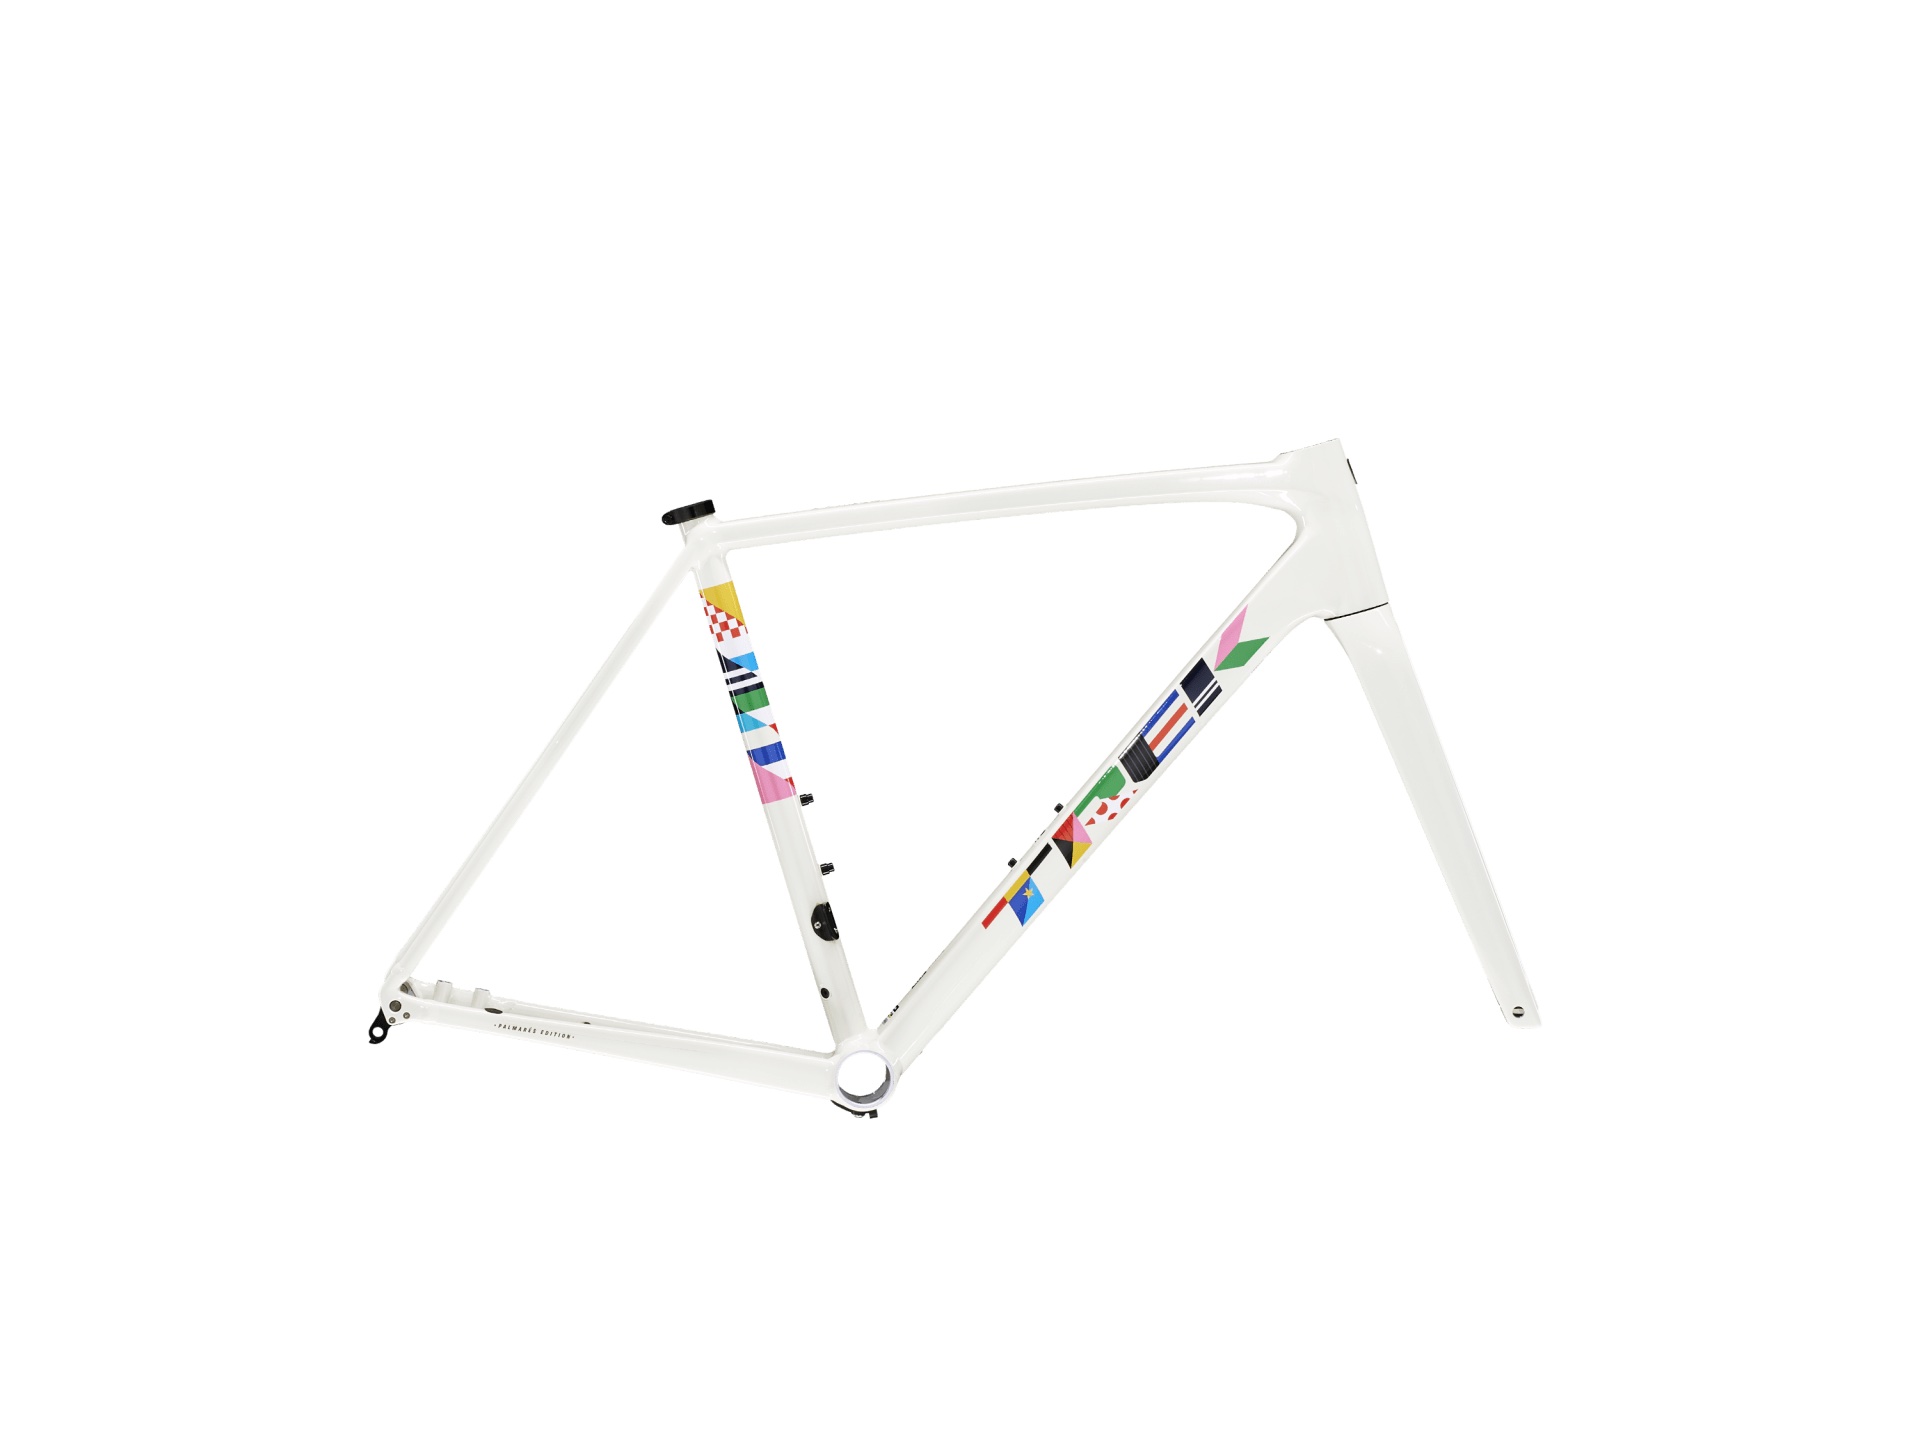 An example of the great paint jobs available on the Emonda ALR framesets. This one is white, with abstract geometric decals on the seat tube in green, pink, yellow and even a red-white check flag, a design that's repeated on the downtube logo.